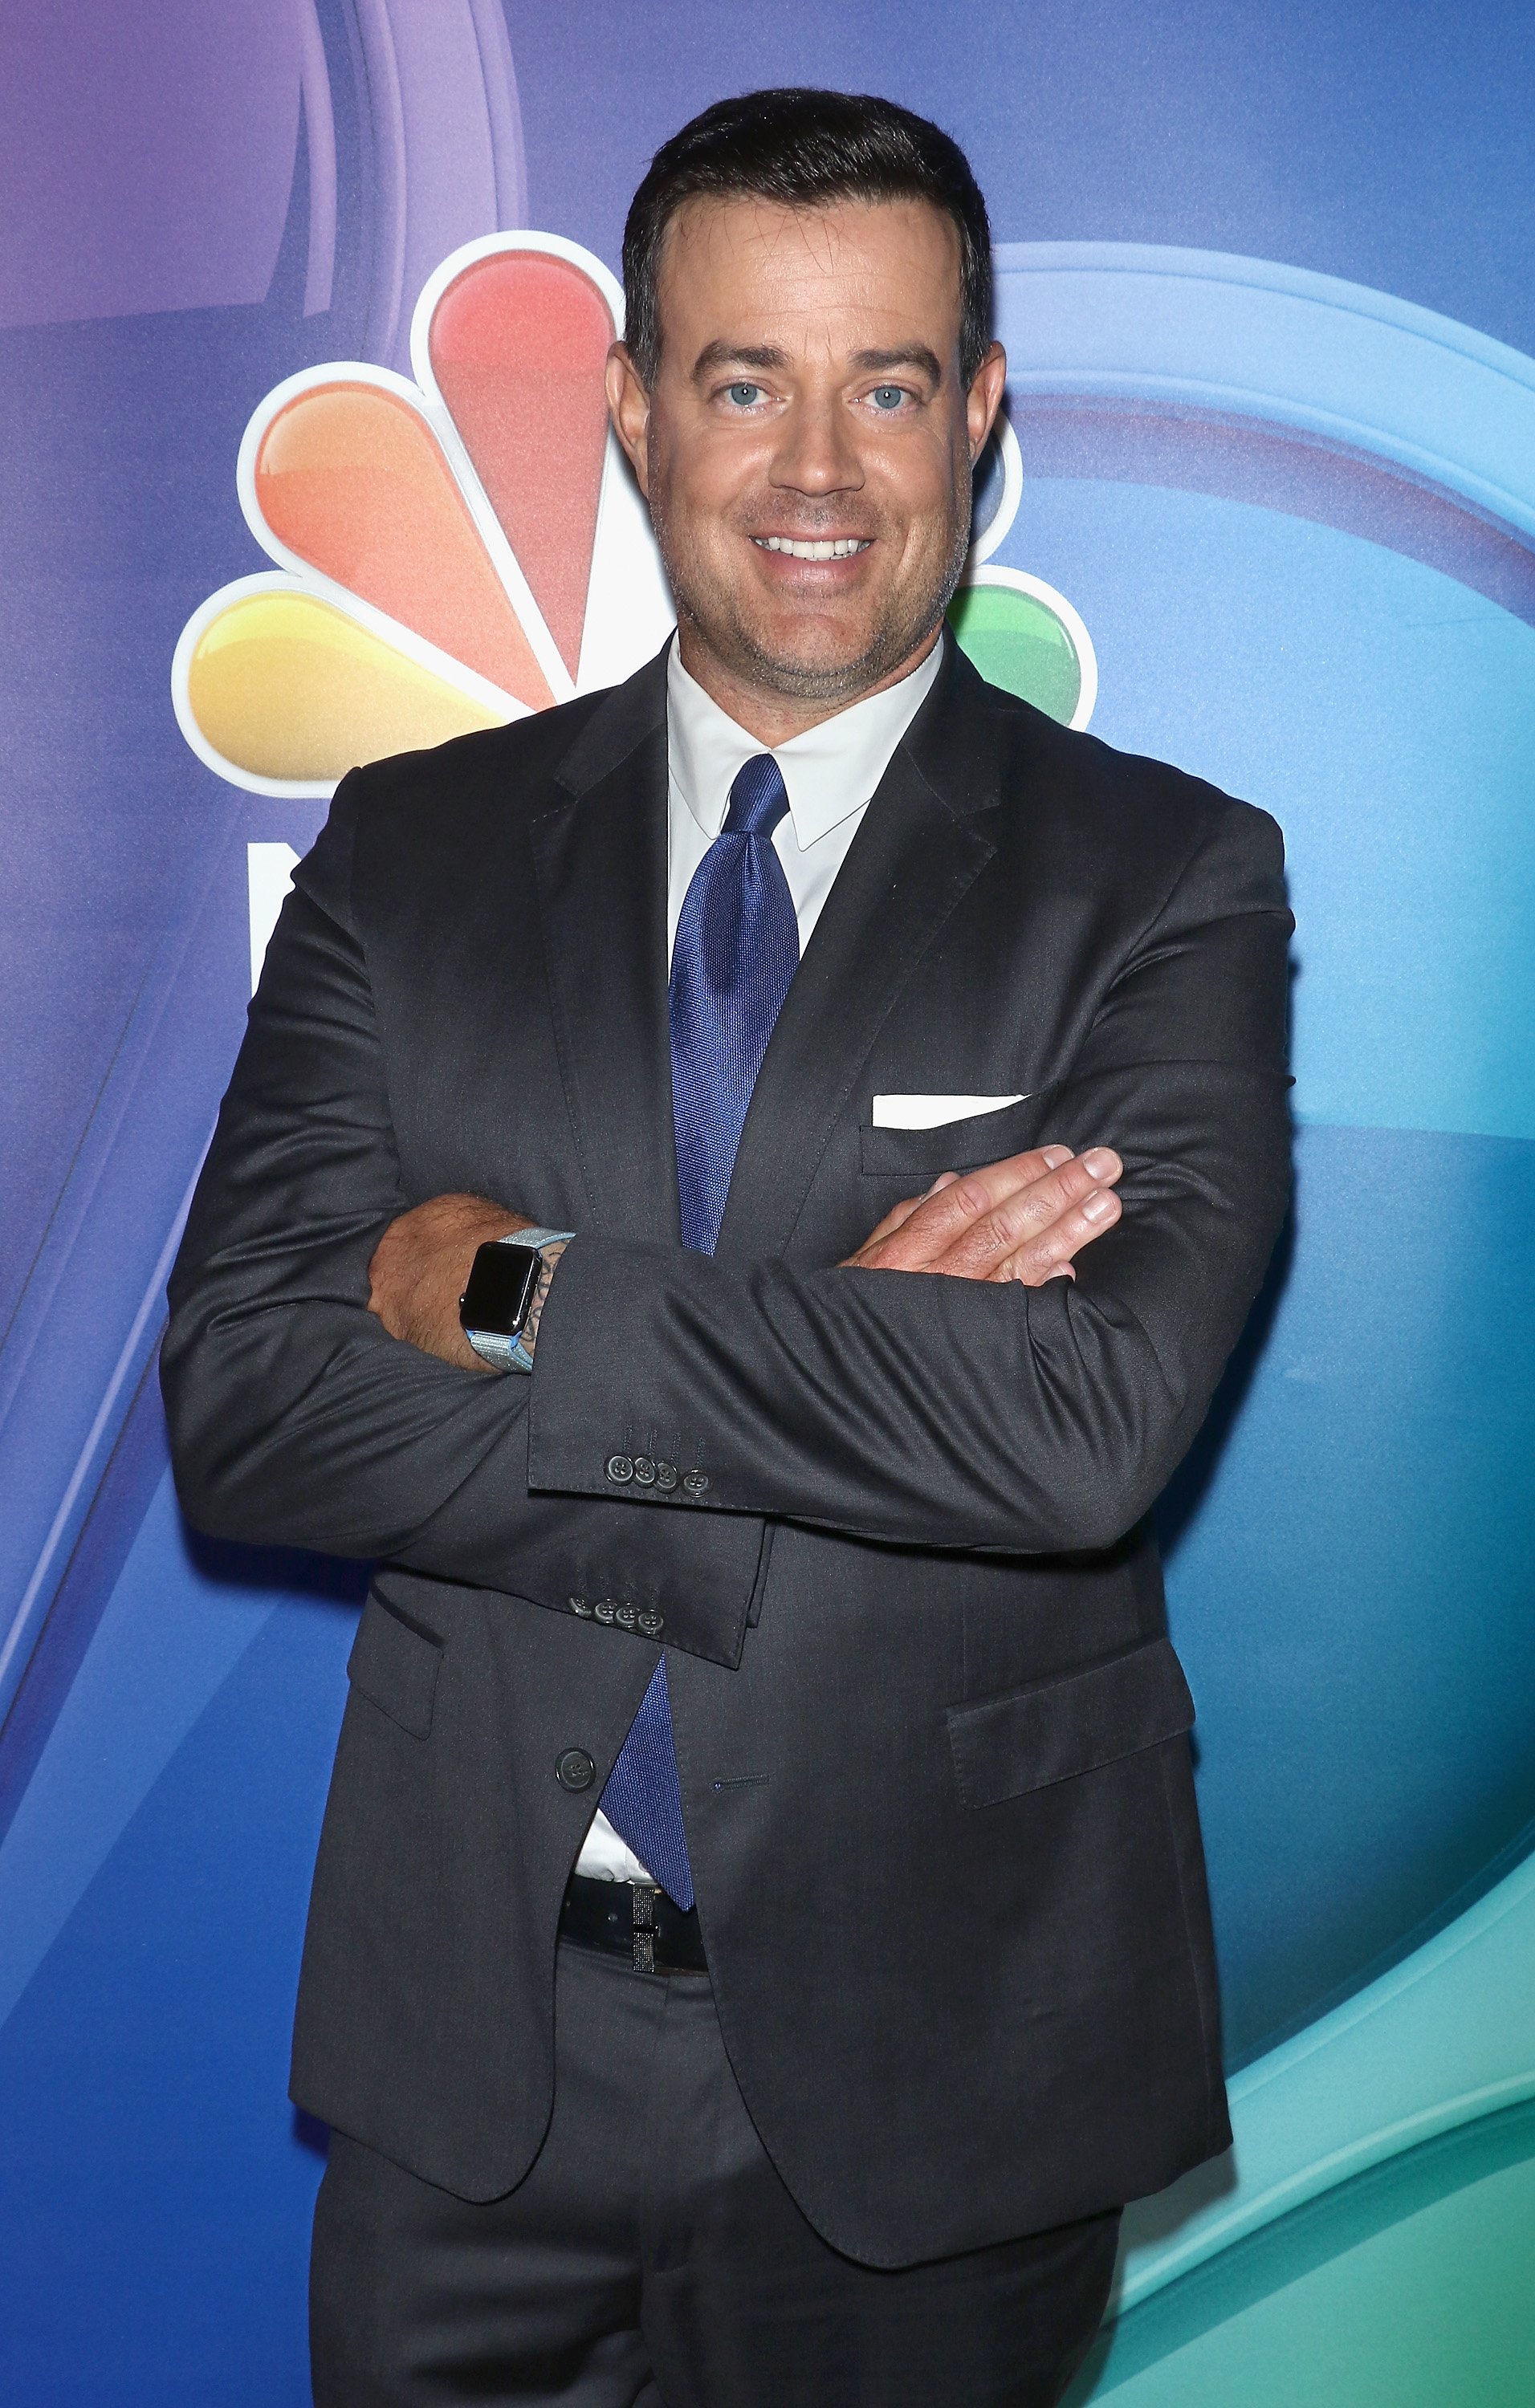 Carson Daly attends the NBC Fall New York Junket at Four Seasons Hotel New York on September 6, 2018 in New York City | Photo: Getty Images